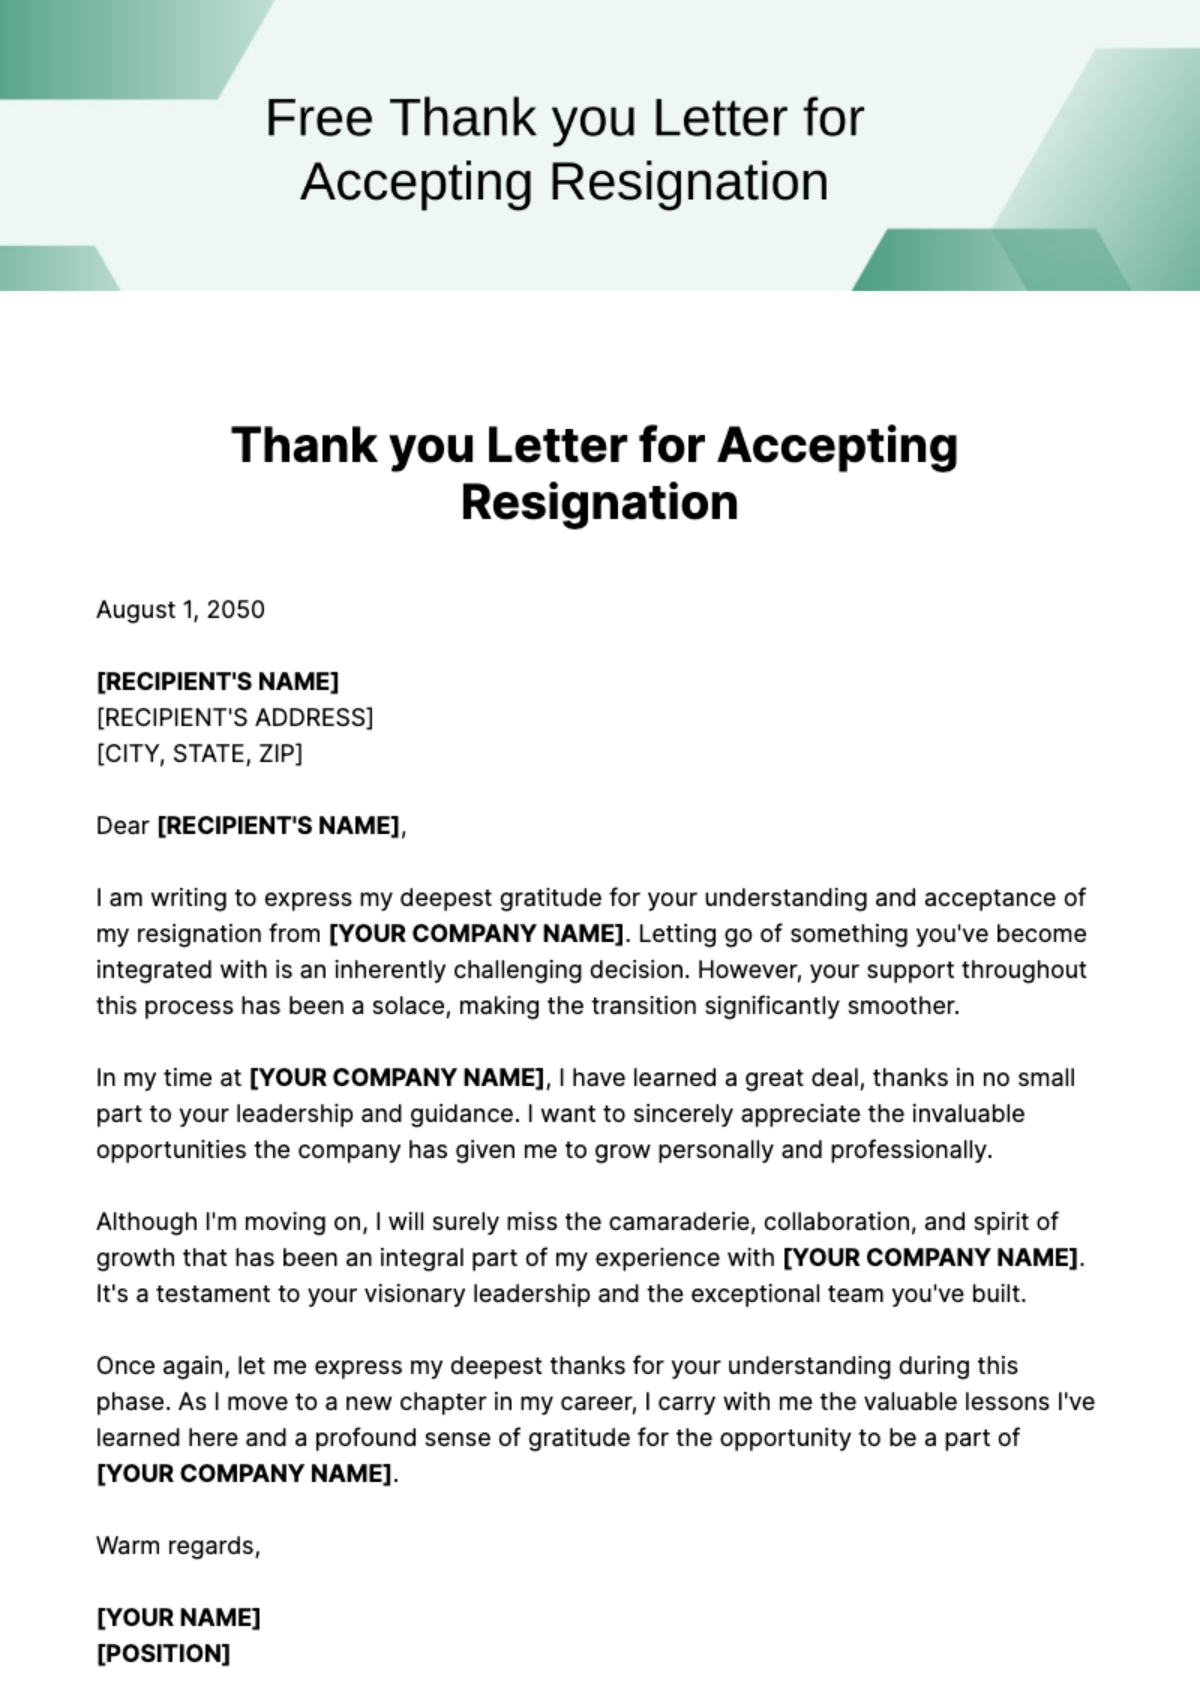 Free Thank you Letter for Accepting Resignation Template